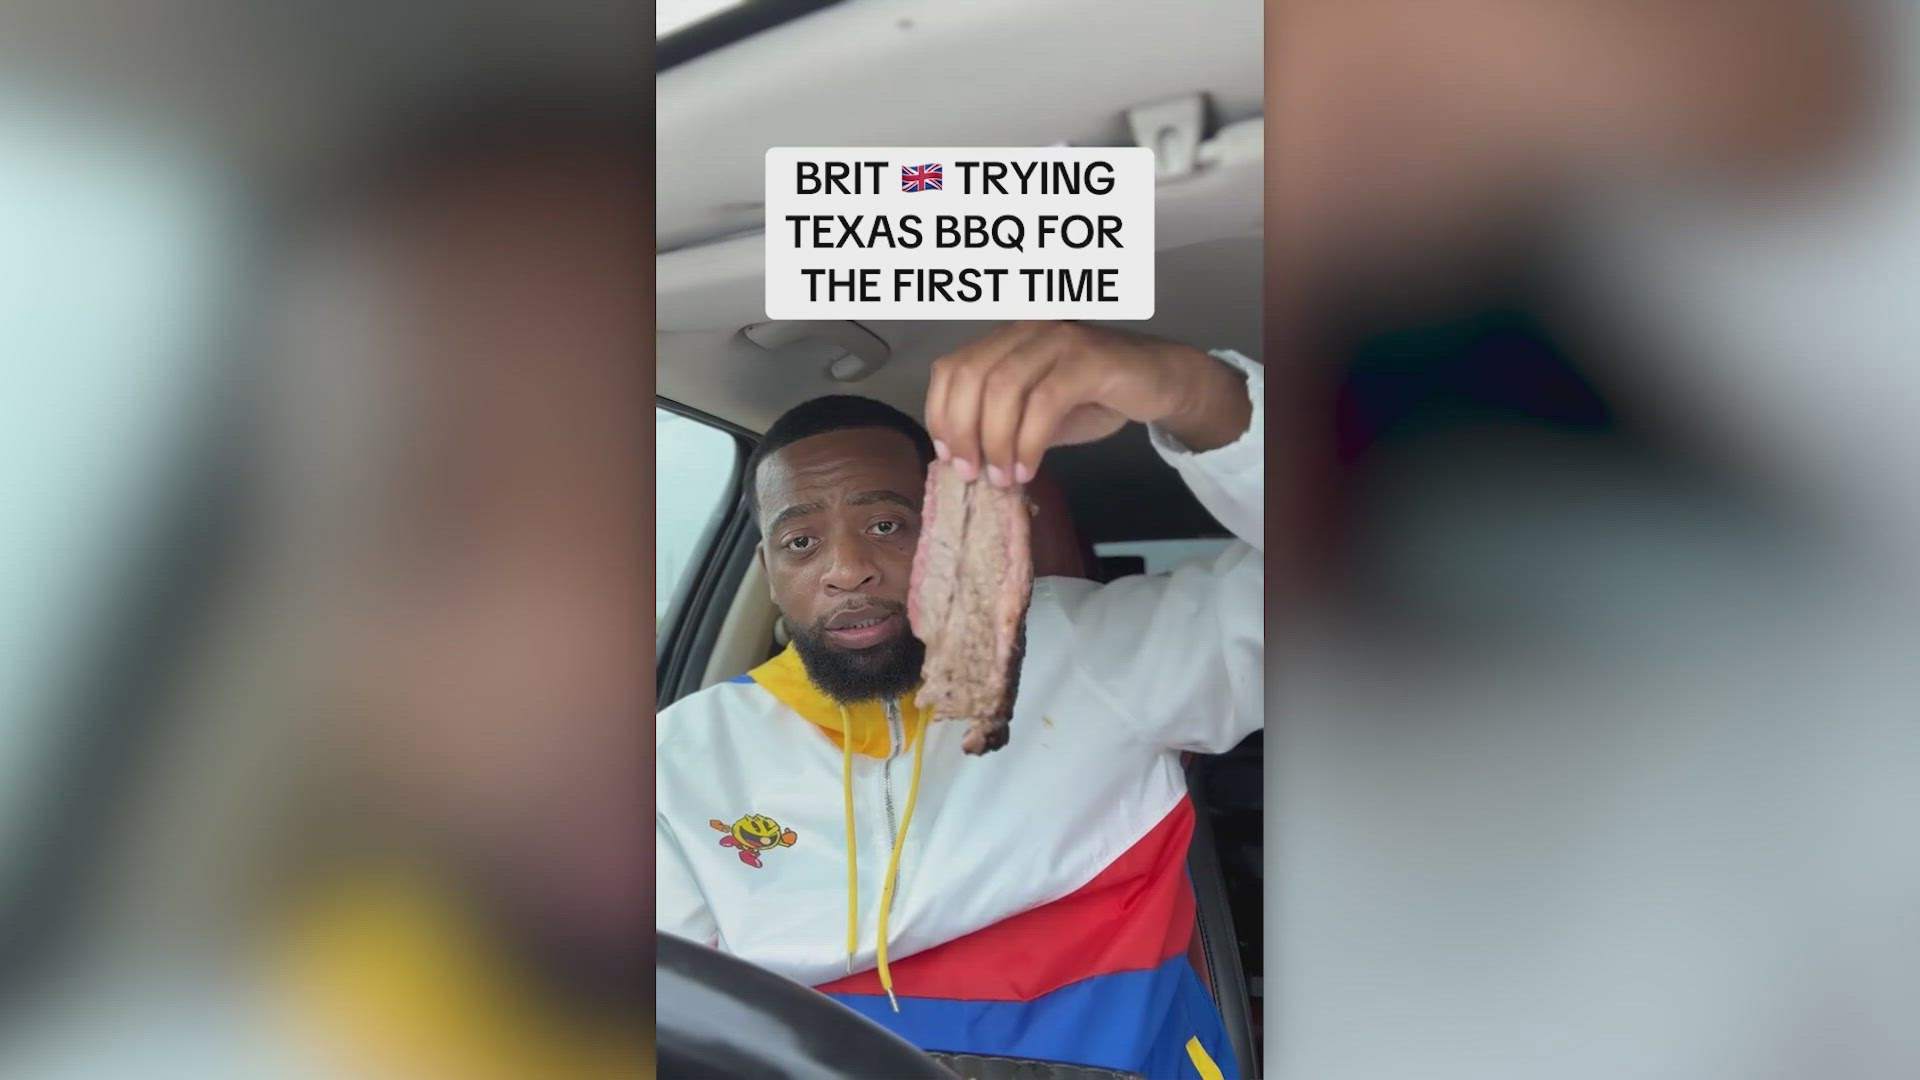 A British man has gone viral on TikTok after trying American food staples for the first time.